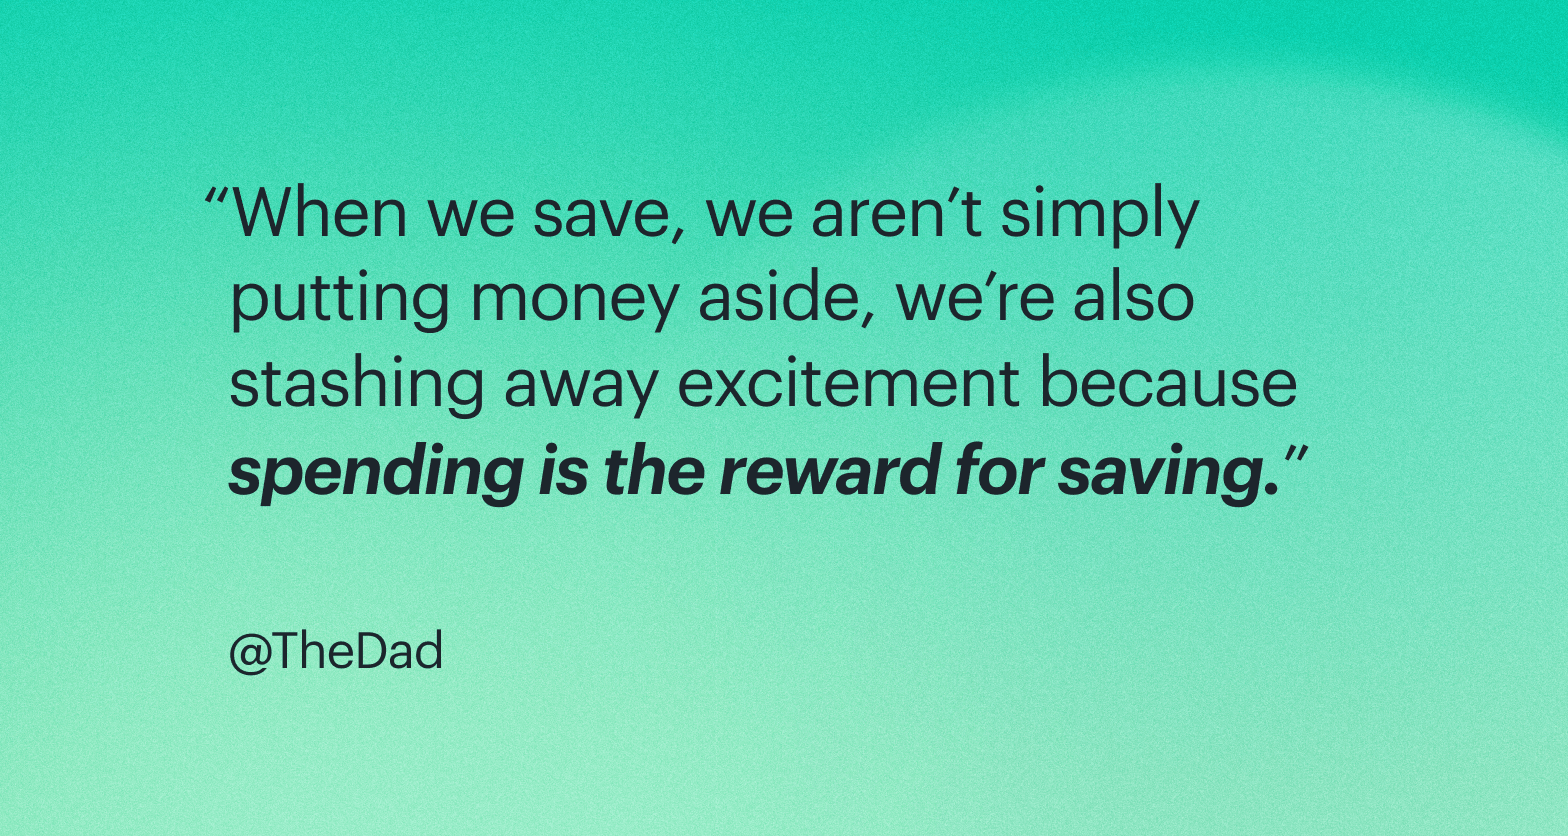 Quote: When we save, we aren't simply putting money aside, we're also stashing away excitement because spending is the reward for saving.